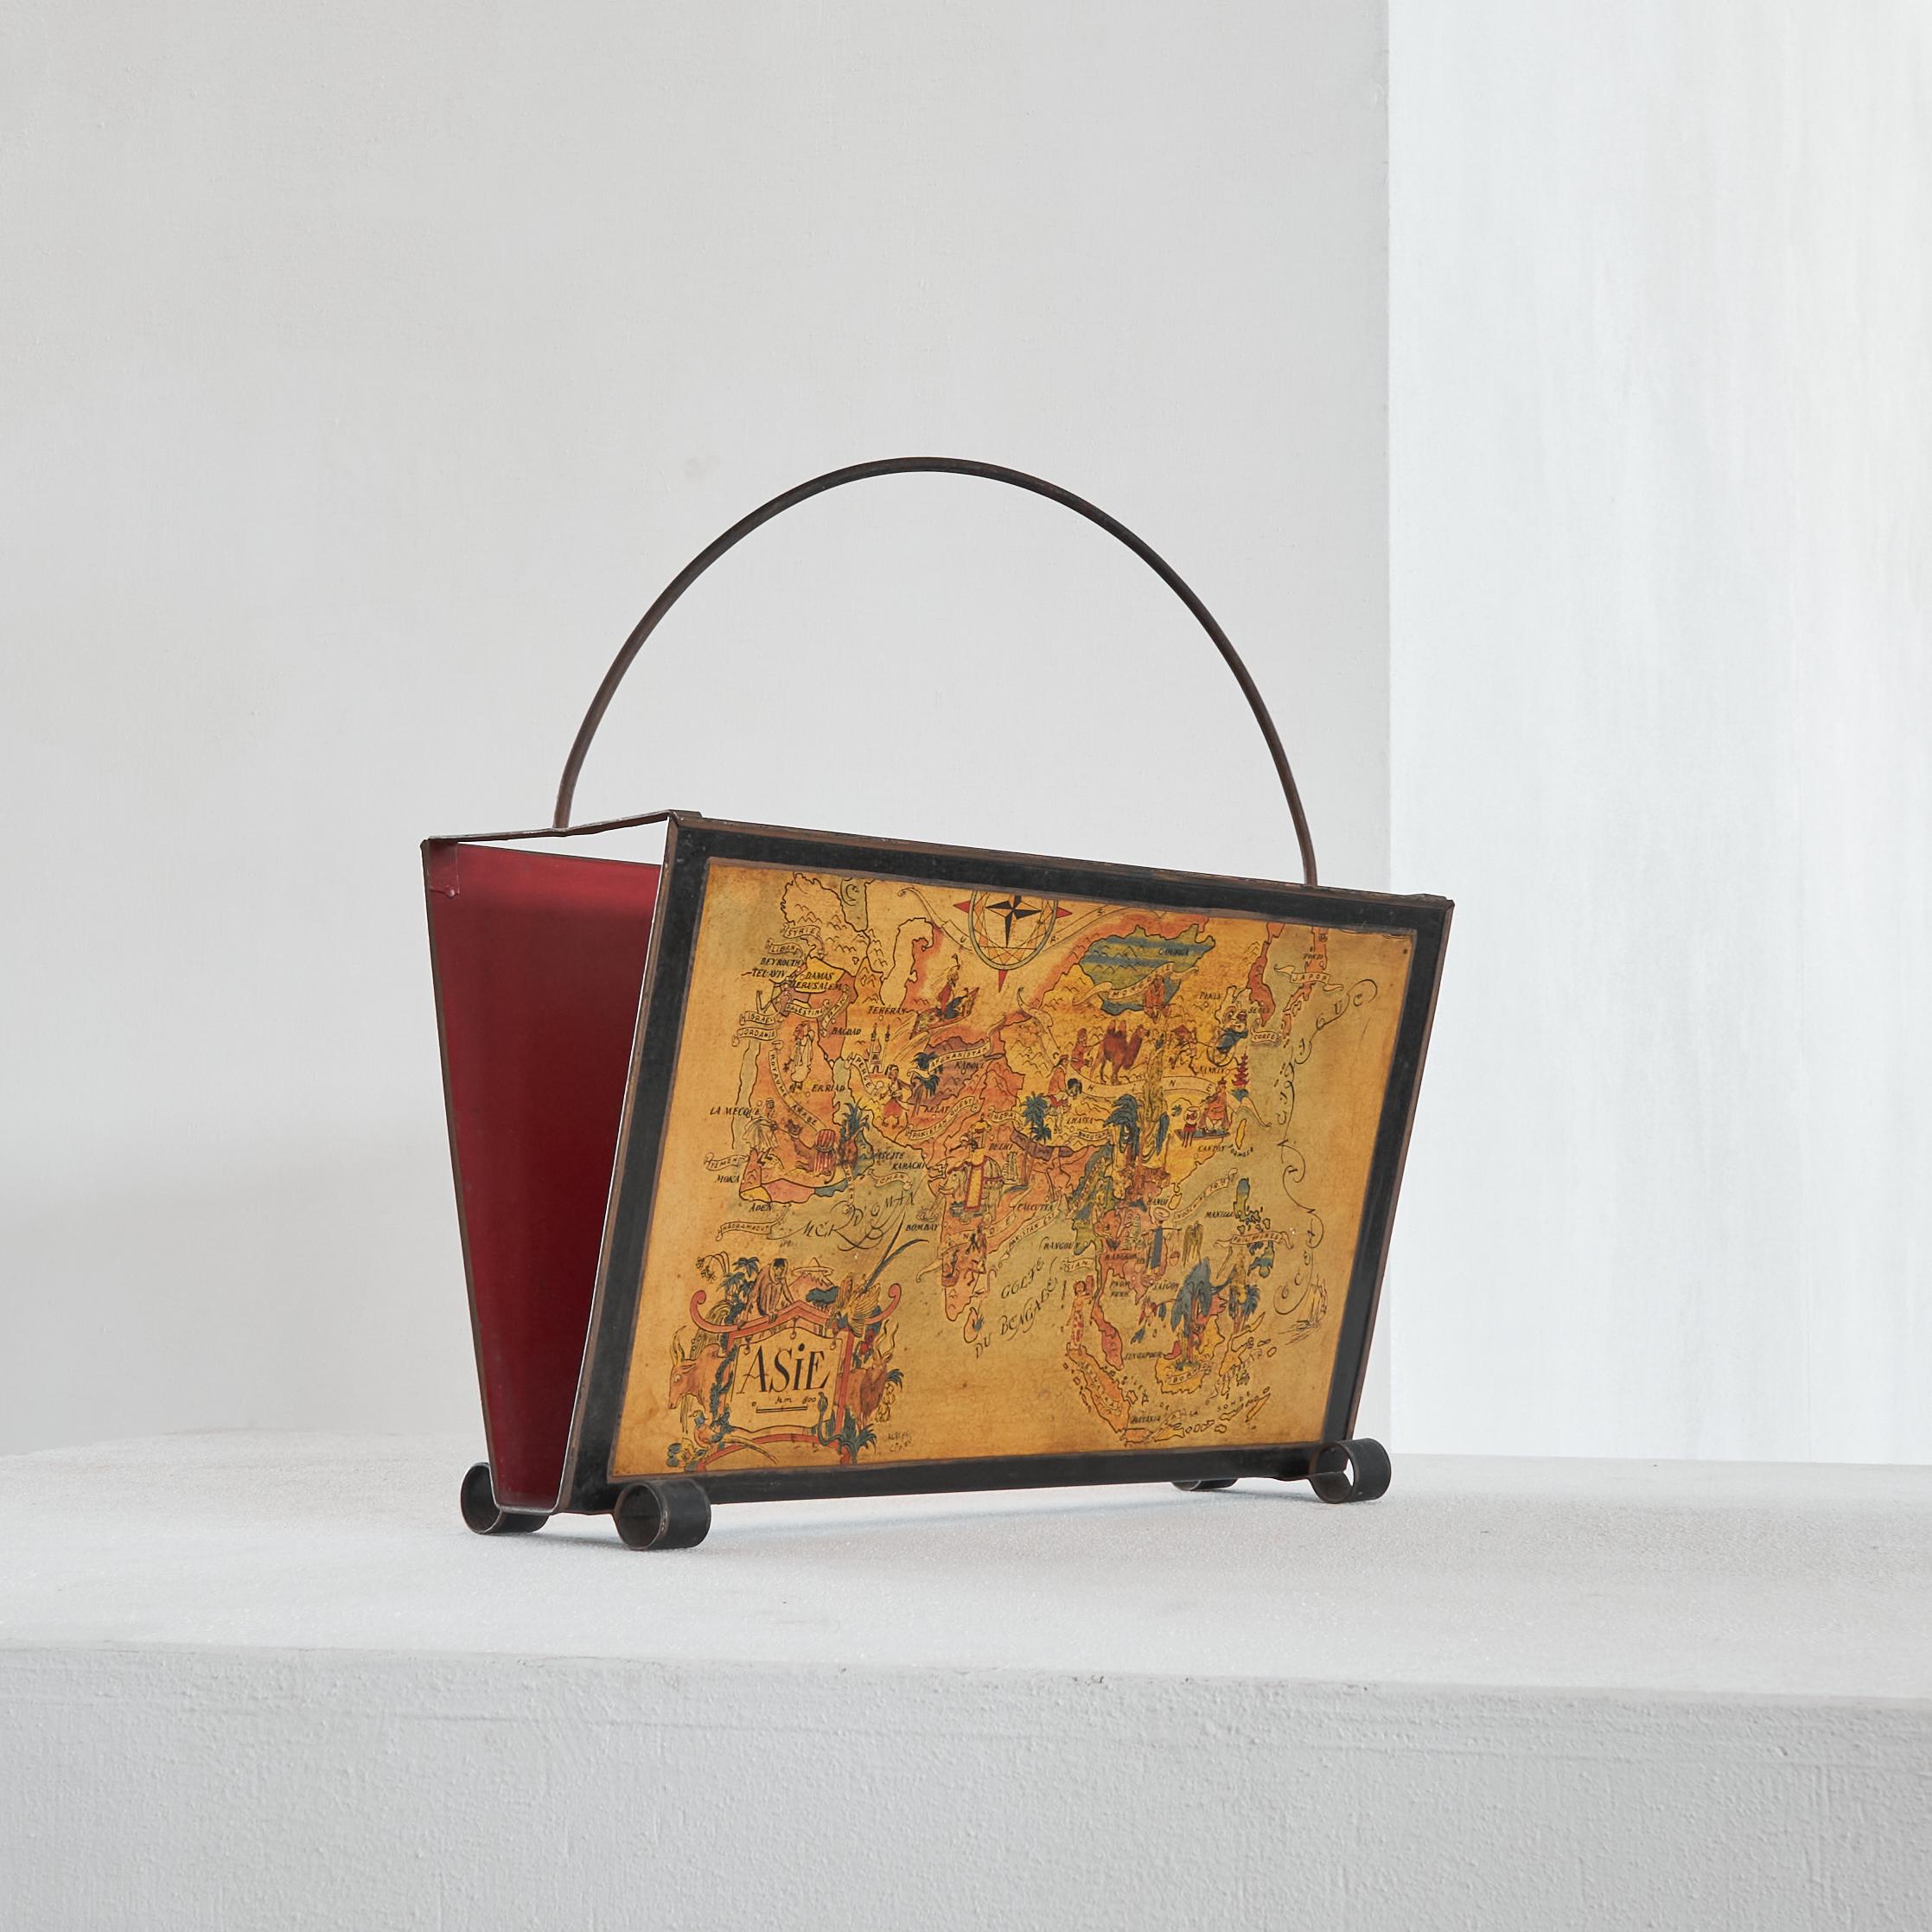 French Jacques Liozu Magazine Rack with Whimsical Silk Screened Maps France 1950s For Sale